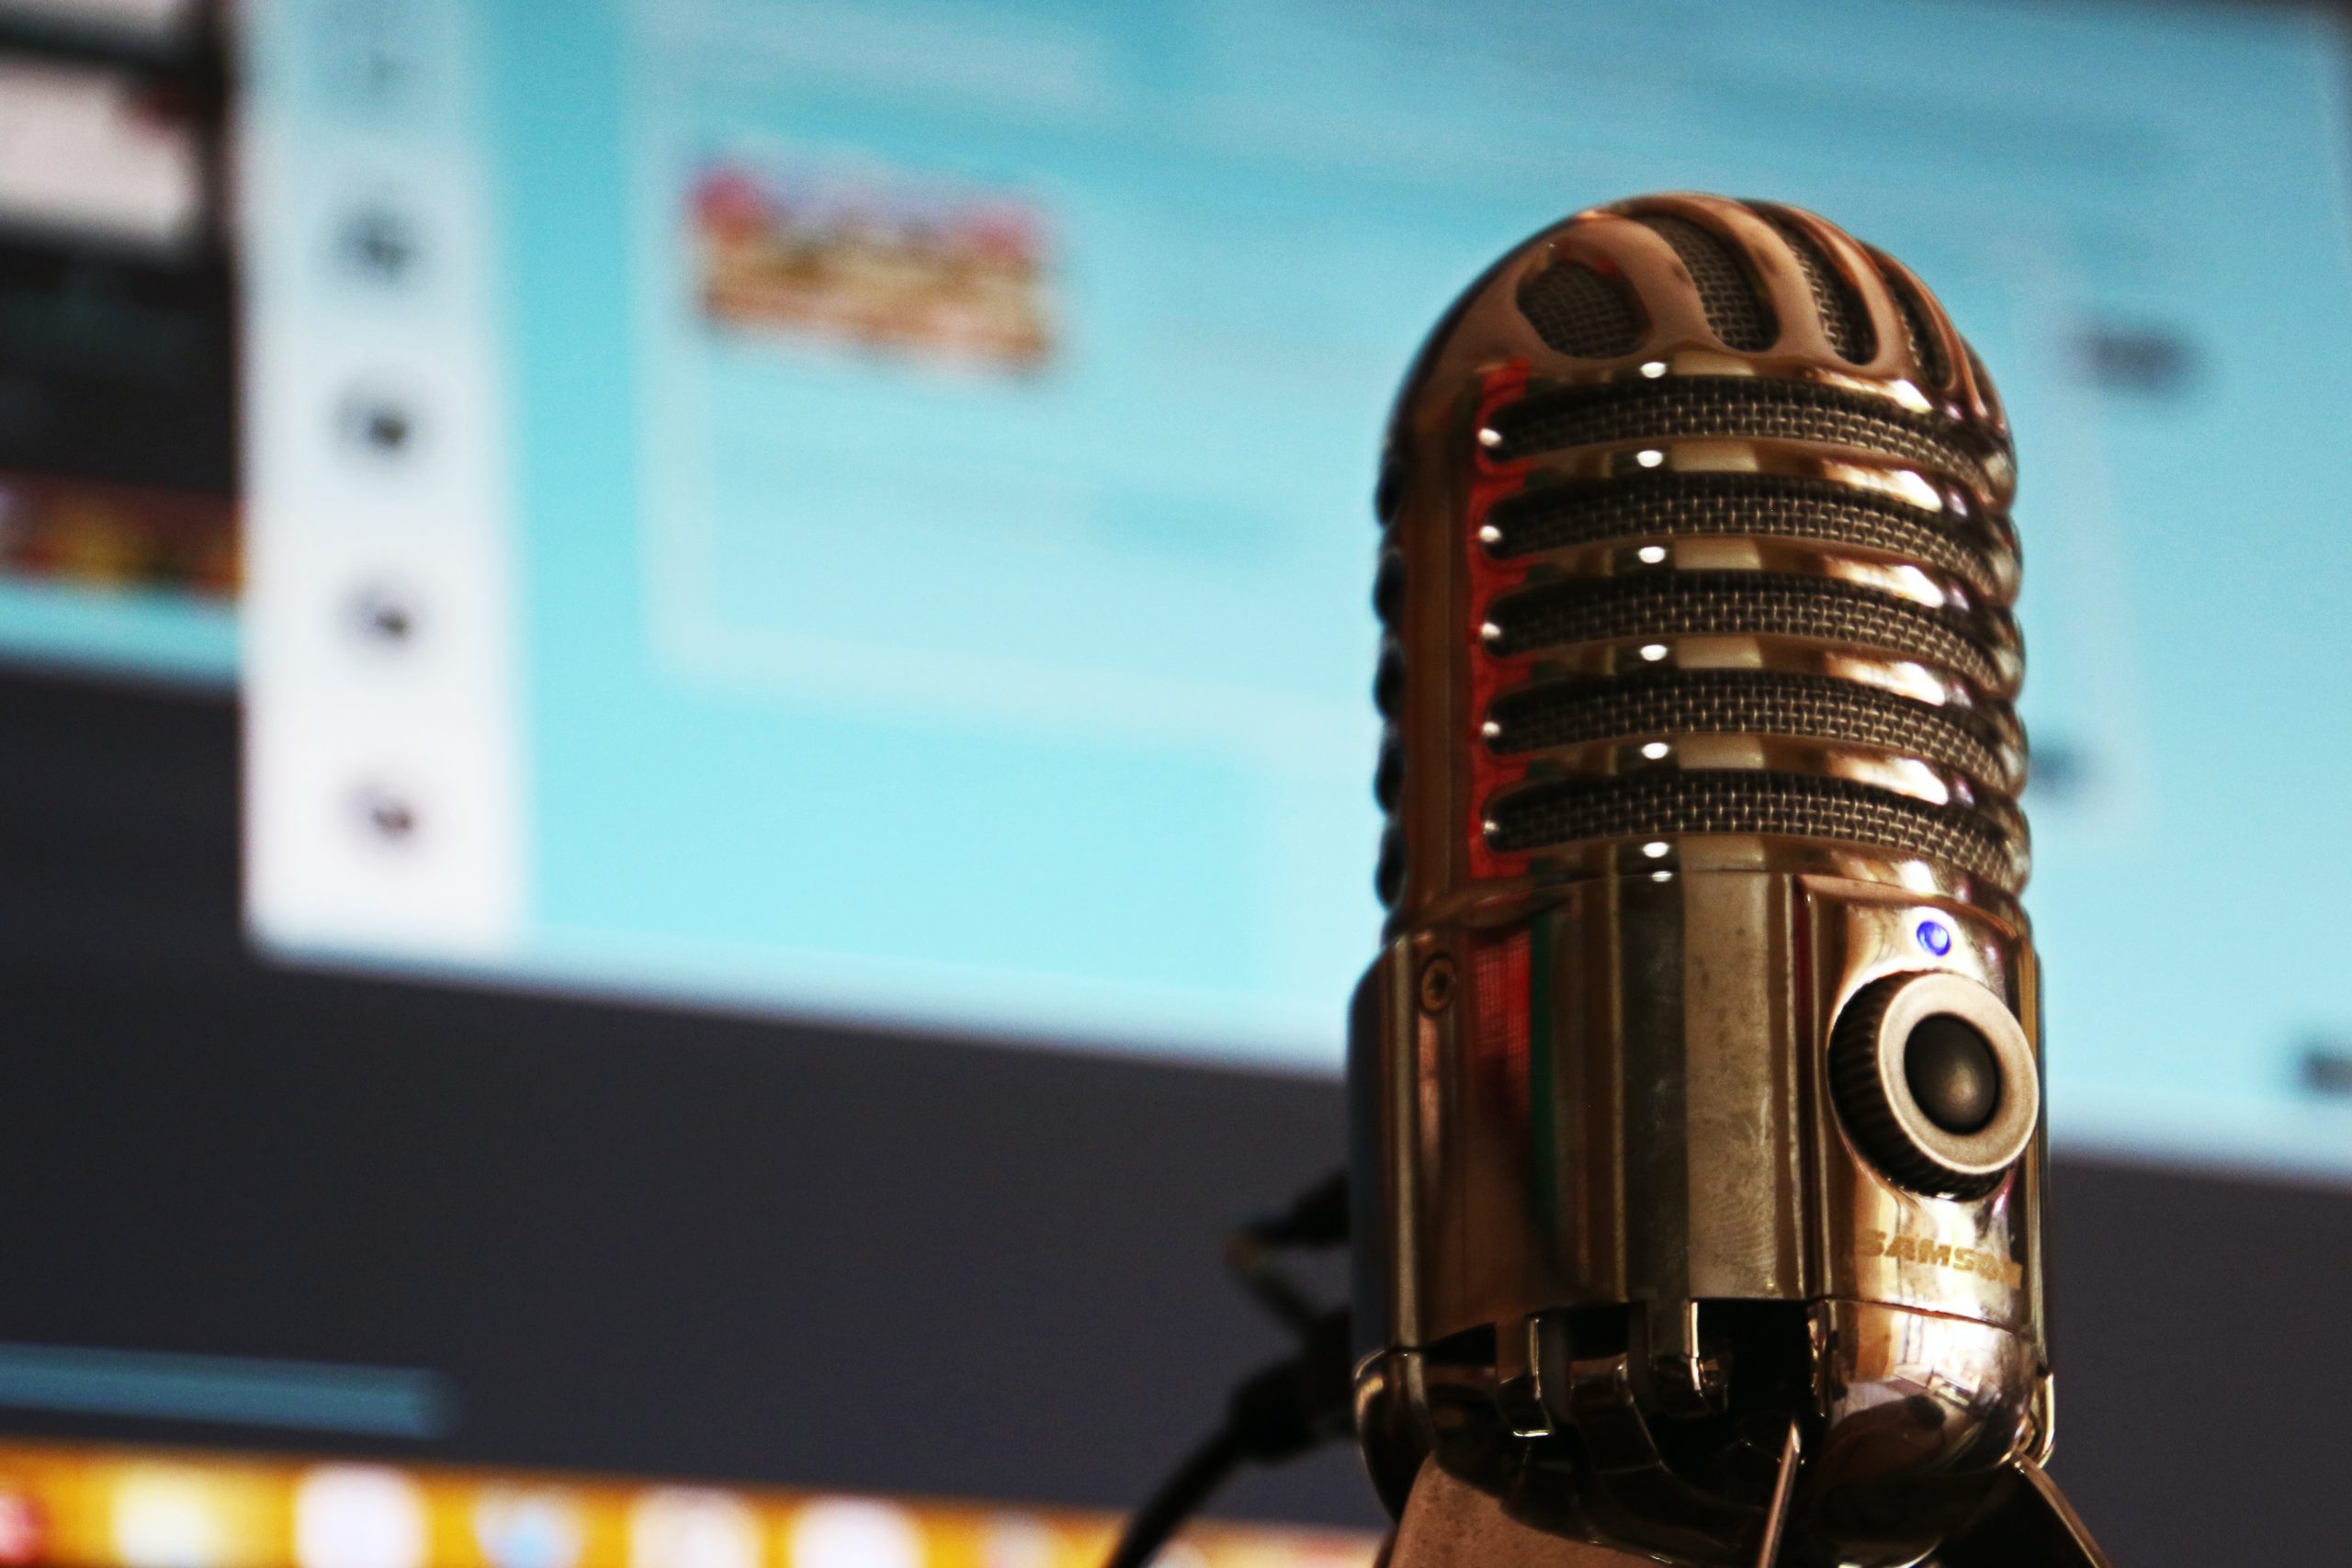 Revenues from Podcast Advertising are projected to hit 1 billion by 2021